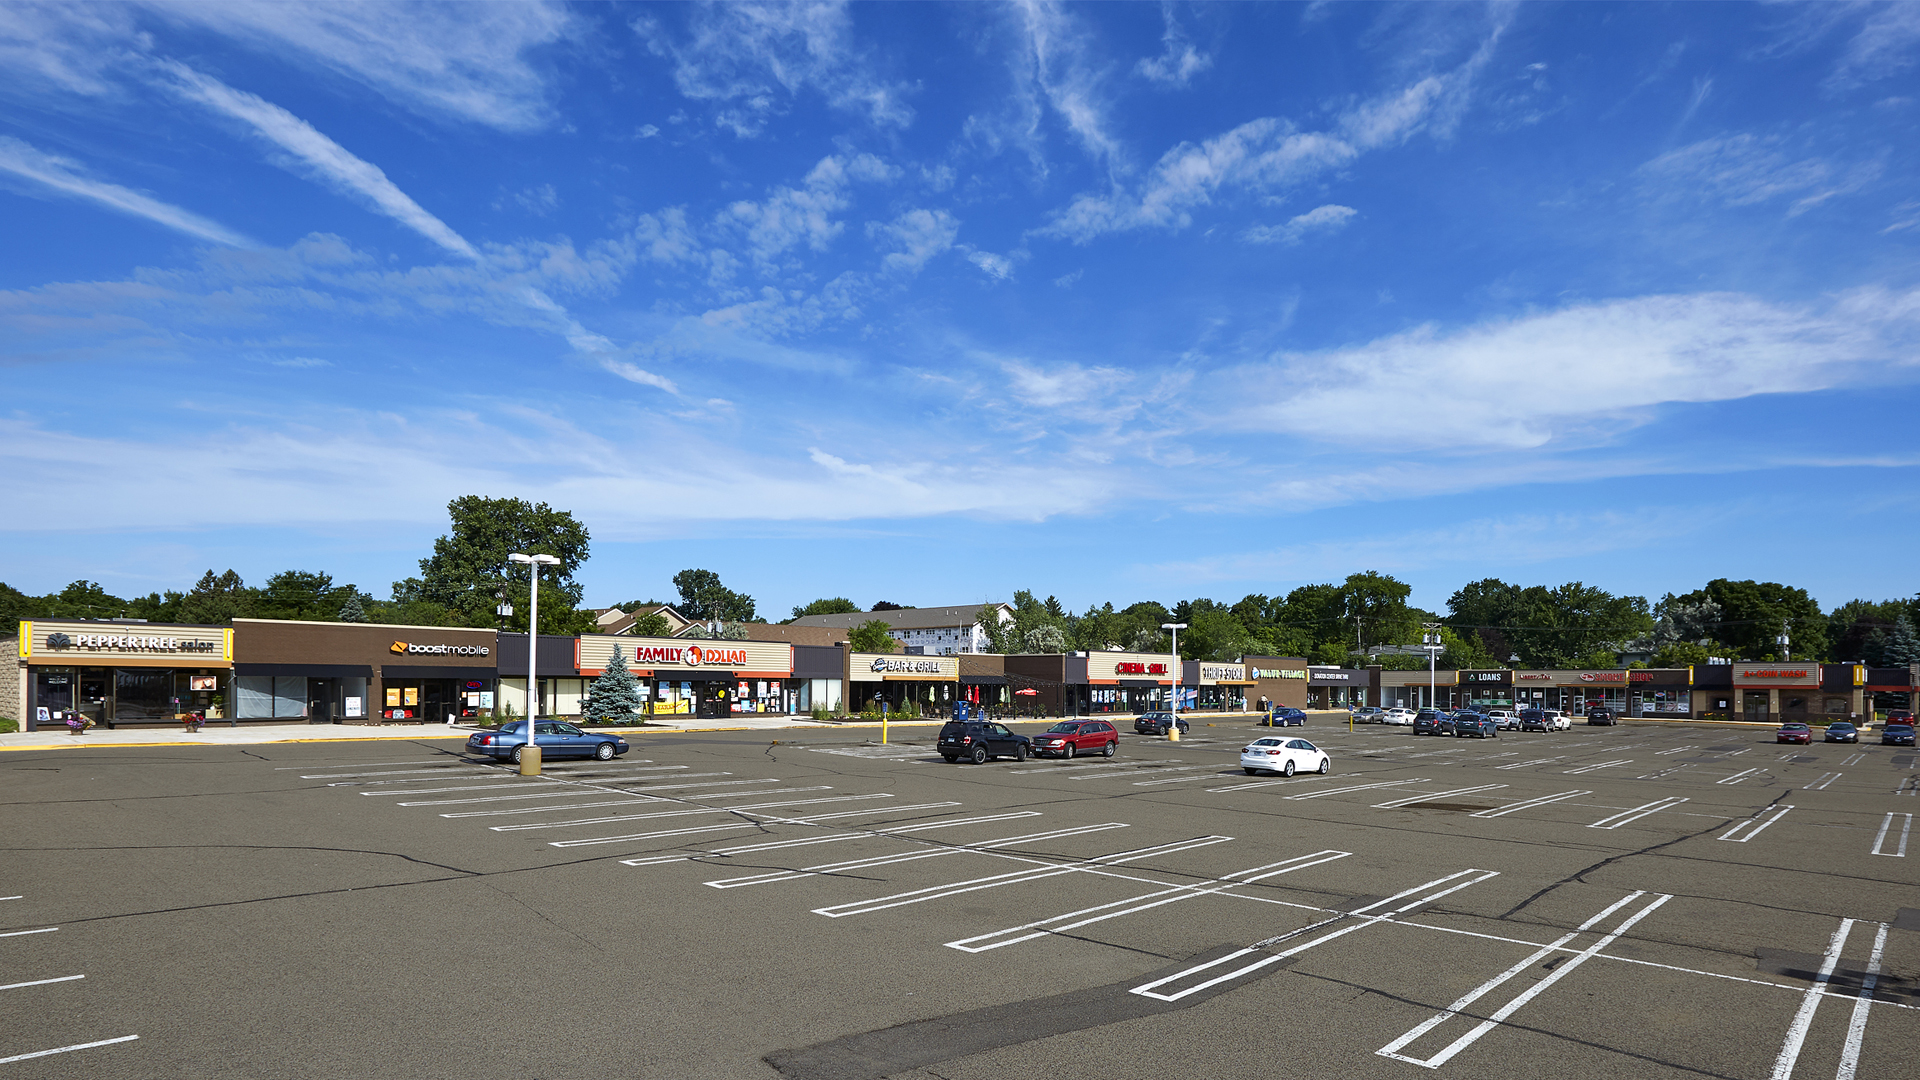 Midland Retail Shopping Center New Hope MN full exterior wide view from surface lot